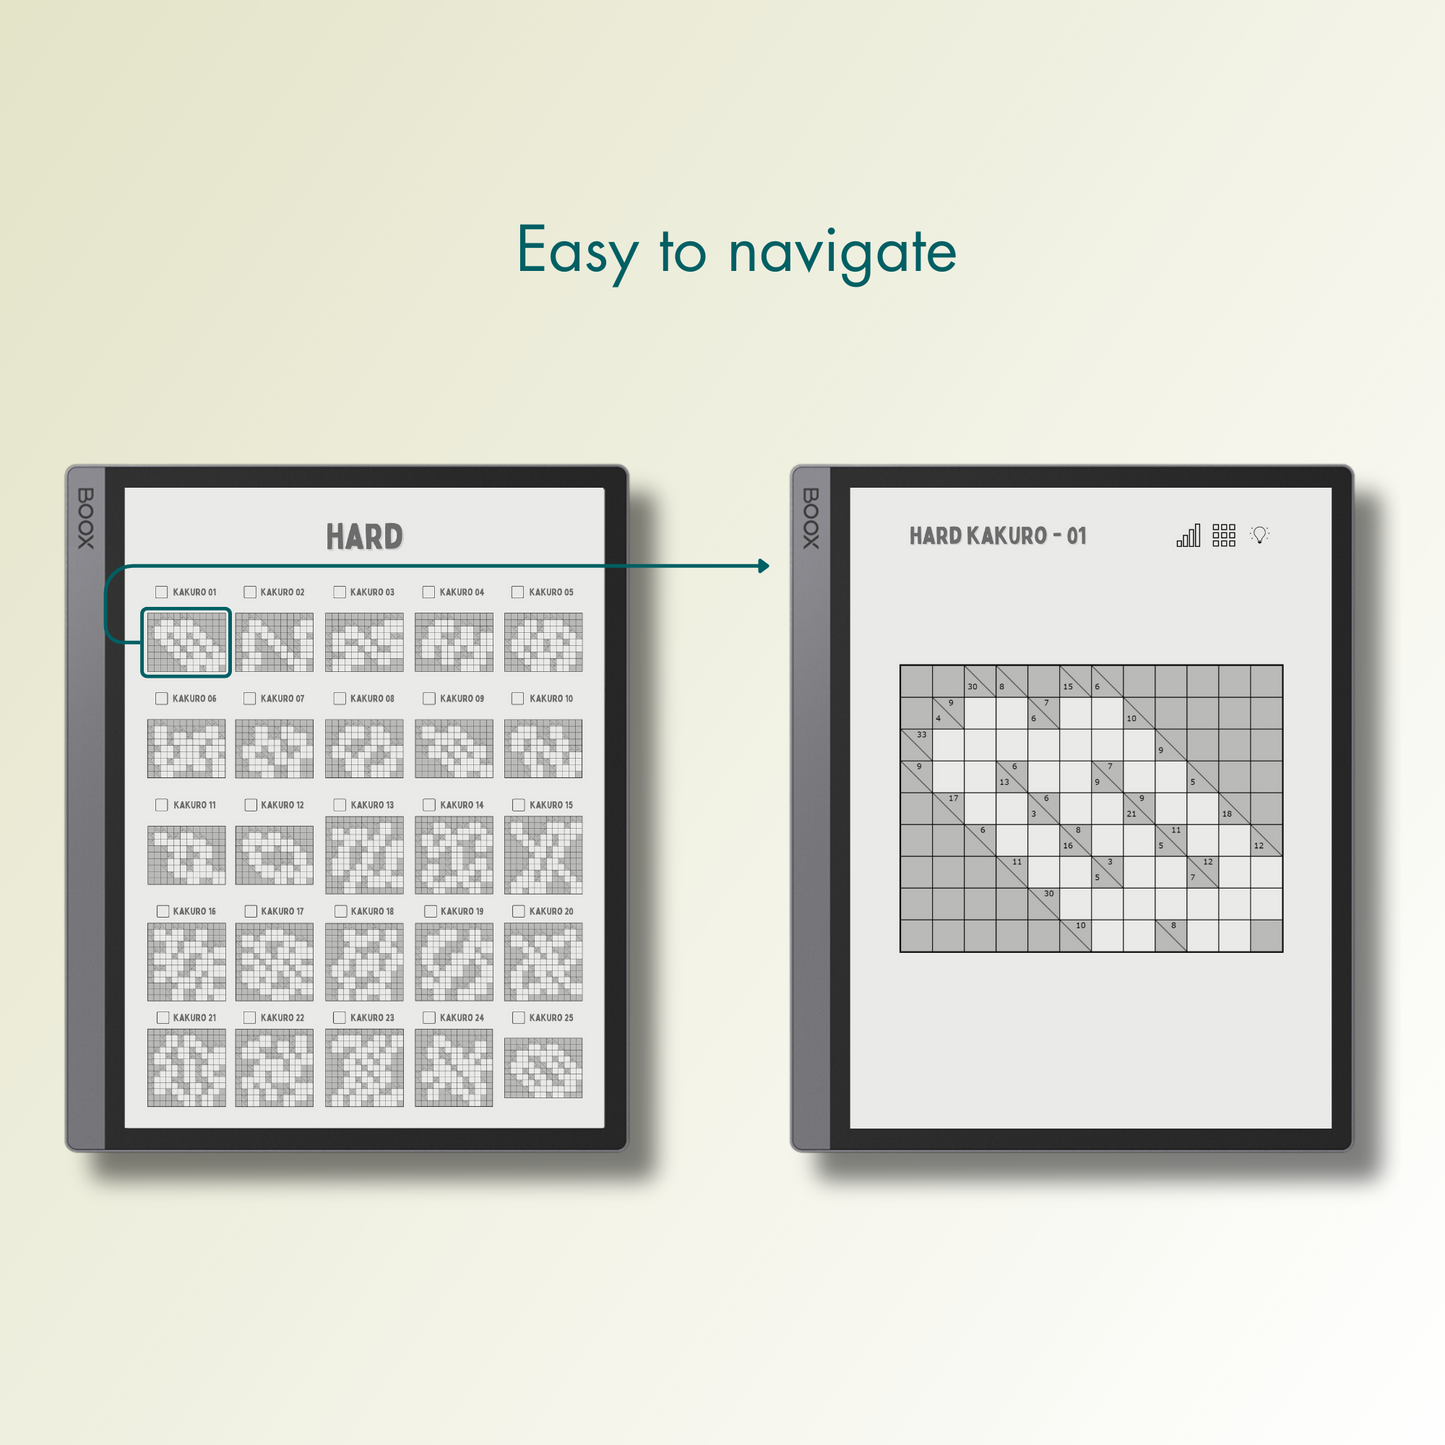 Onyx Boox Kakuro Puzzles with easy navigations.